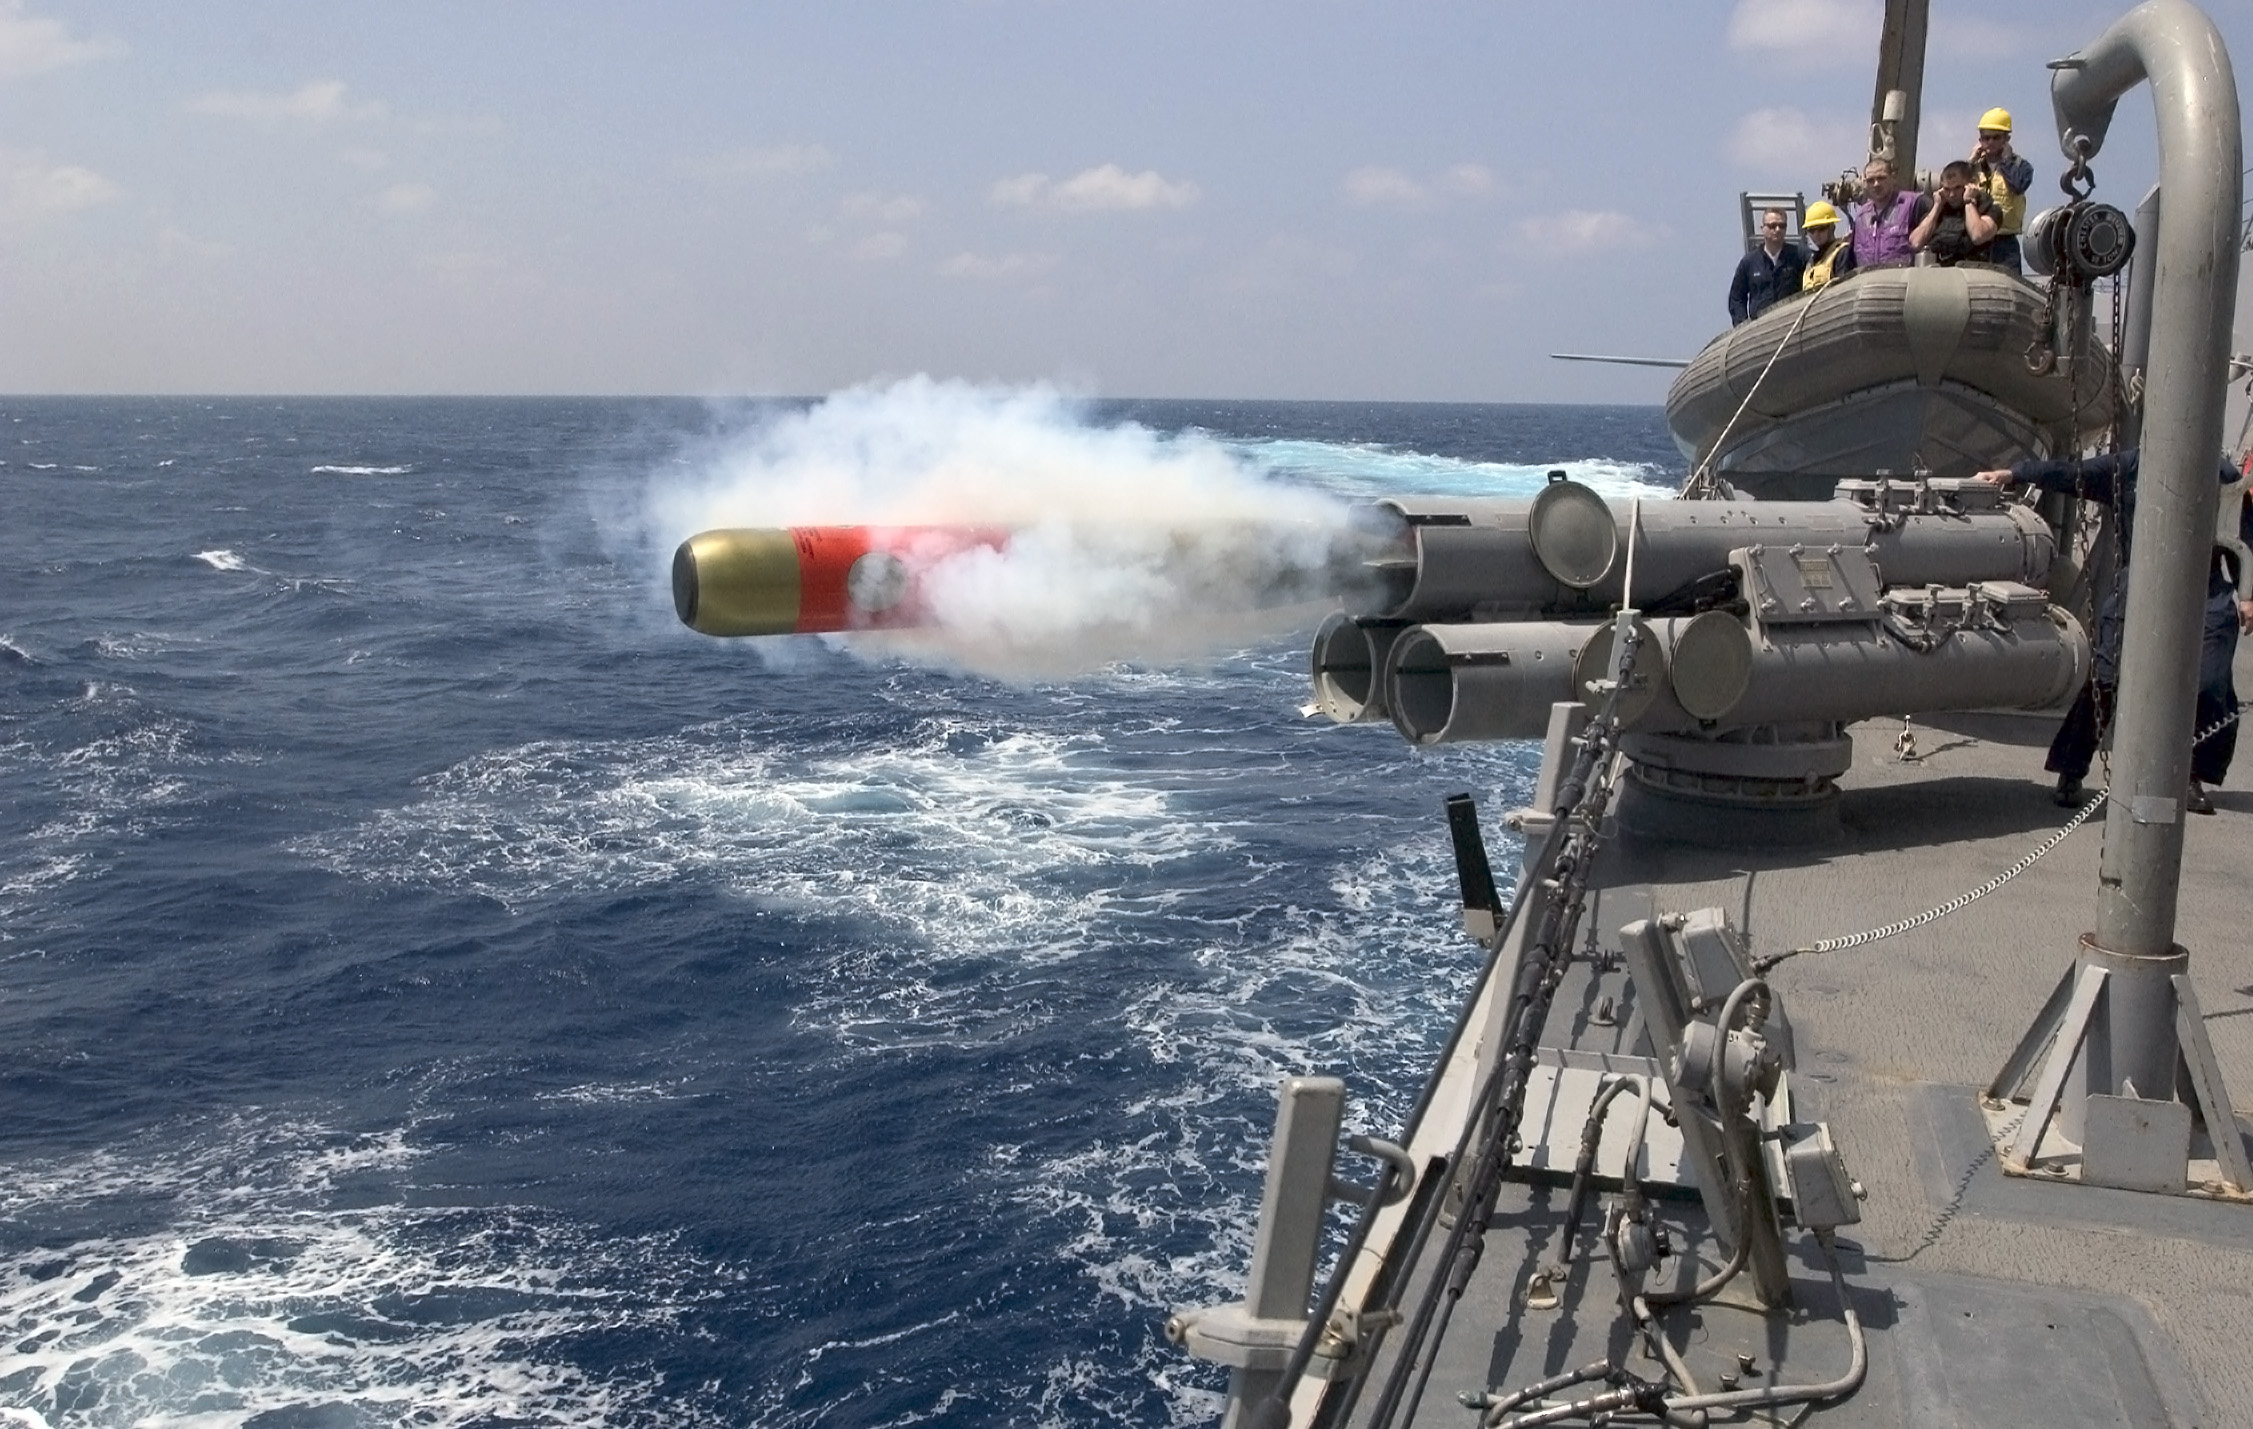 A MK-46 exercise torpedo is launched from the deck of the guided-missile destroyer USS Mustin (DDG 8 by John L. Beeman